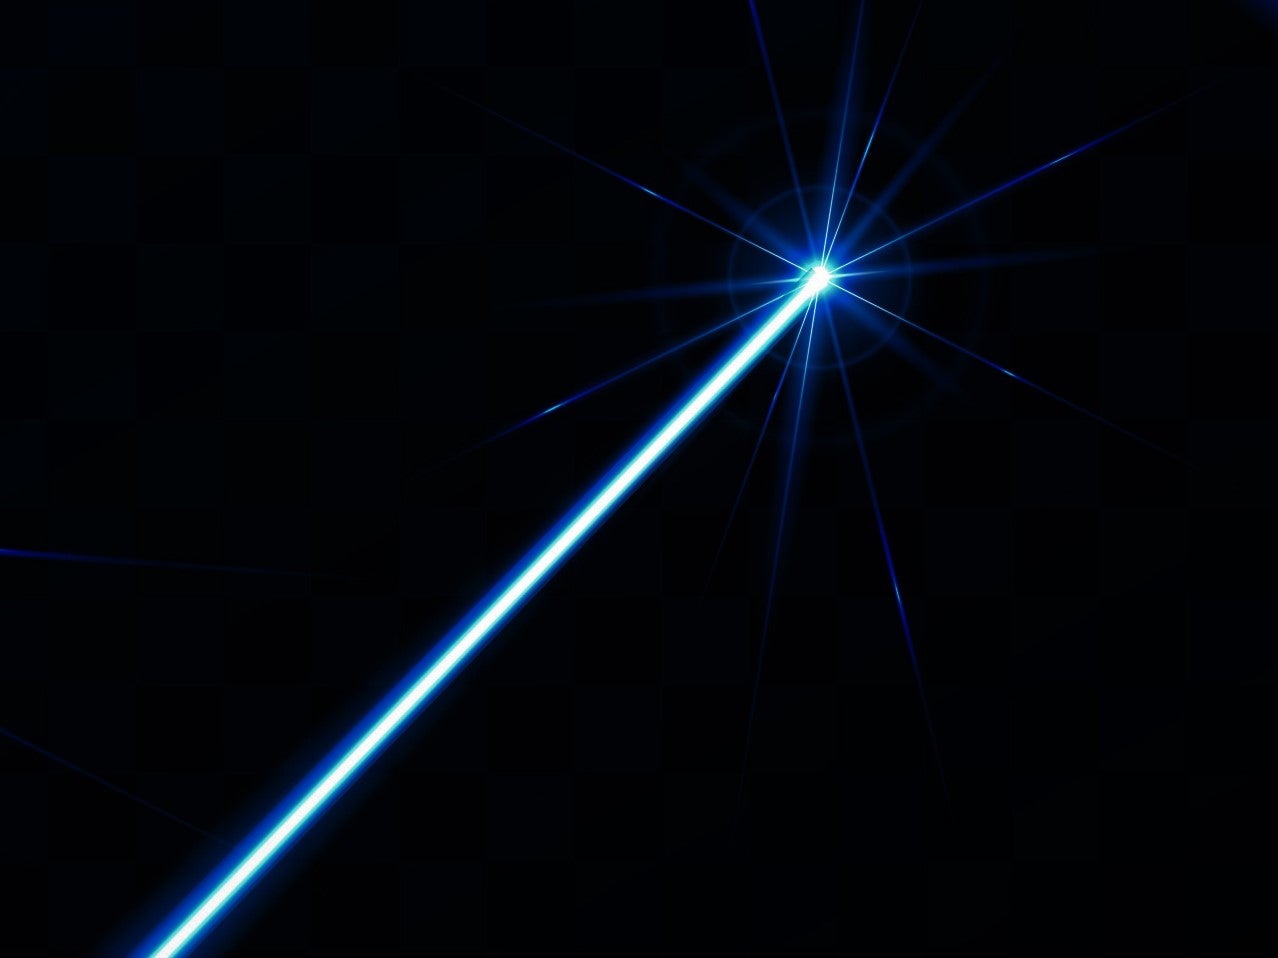 A quantum laser breakthrough could vastly improve the detection of cancer